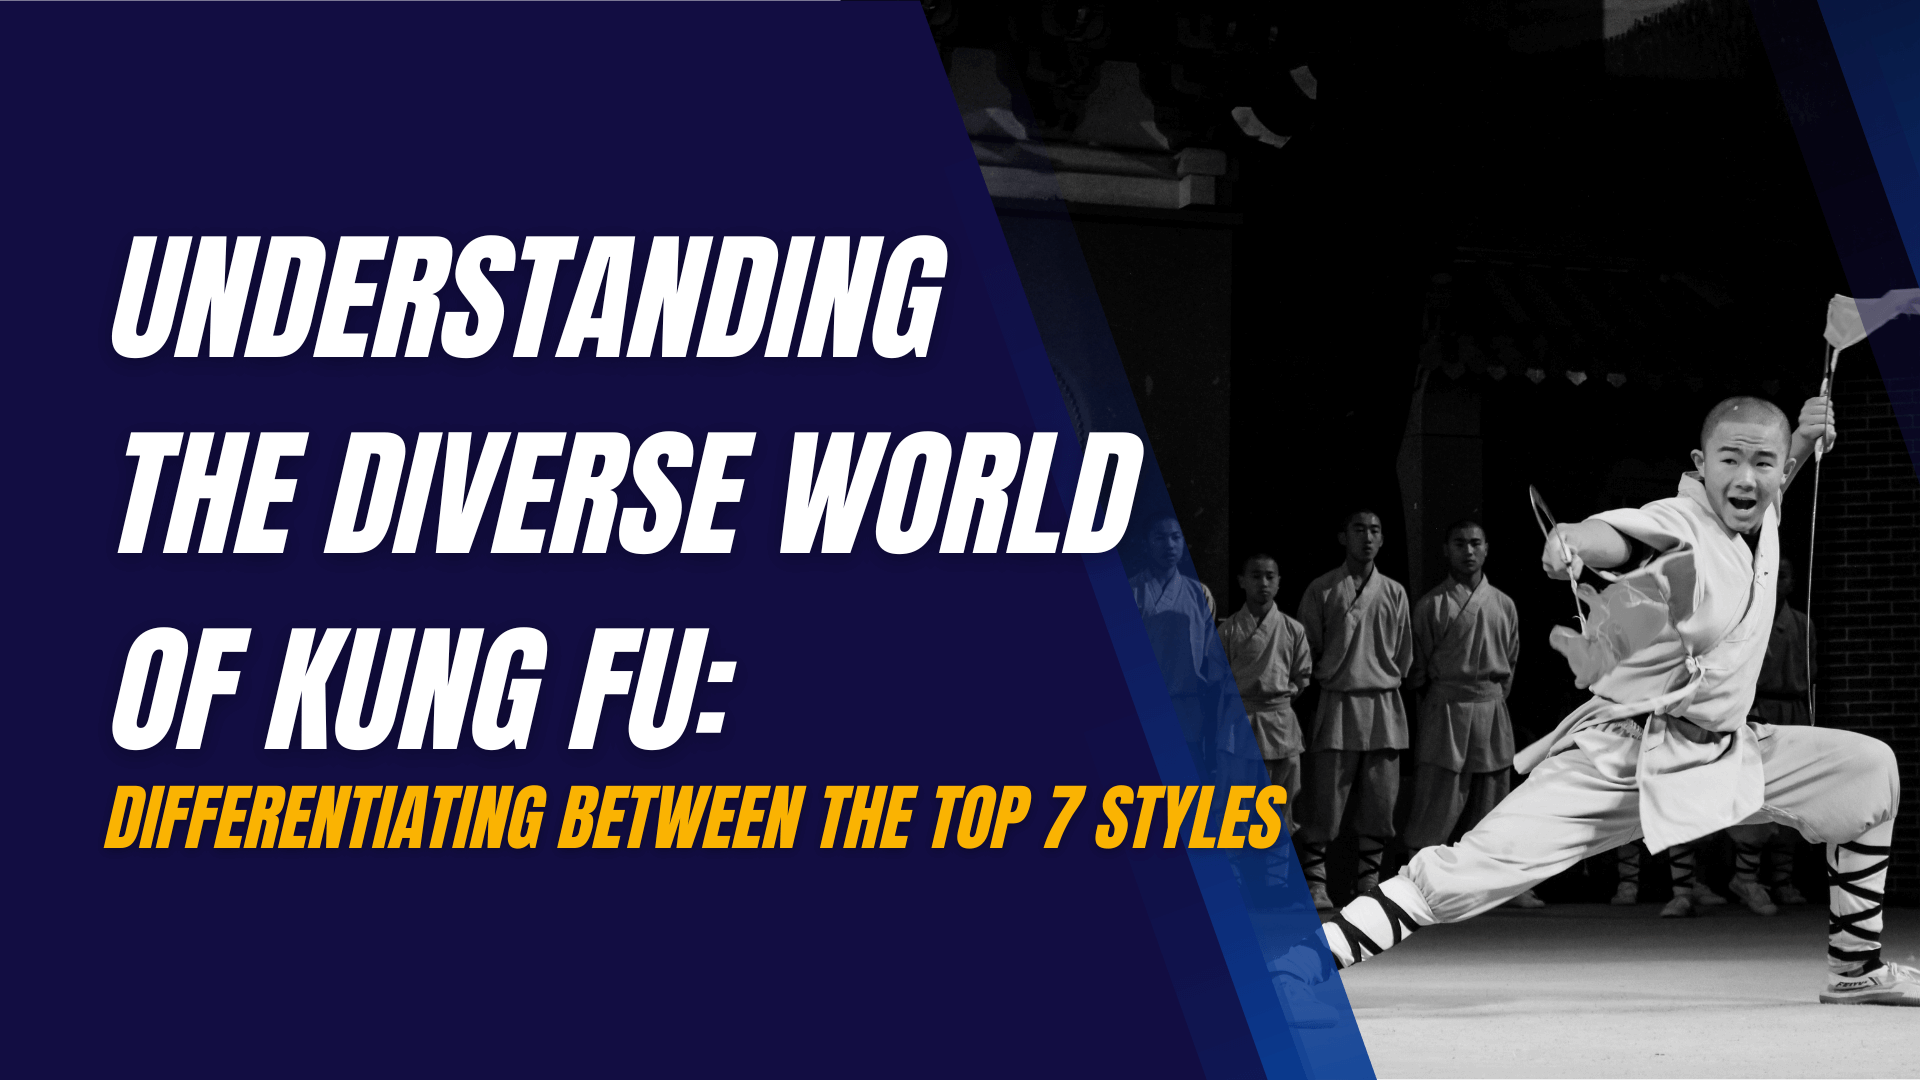 Understanding the Diverse World of Kung Fu: Differentiating Between the Top 7 Styles